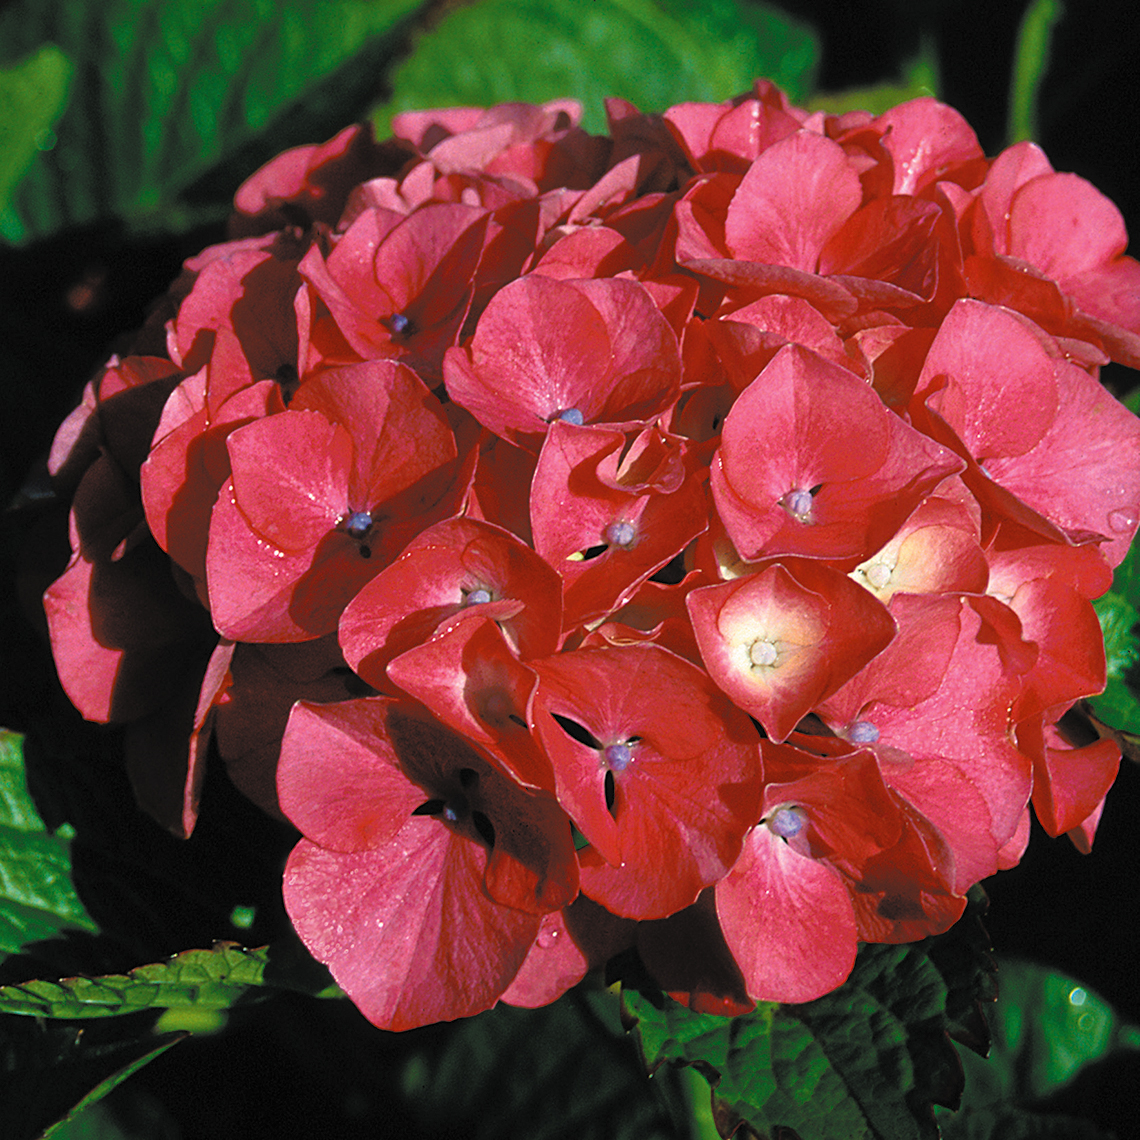 Red mophead flower of Masja hydrangea with tiny purple dots in the center of each floret